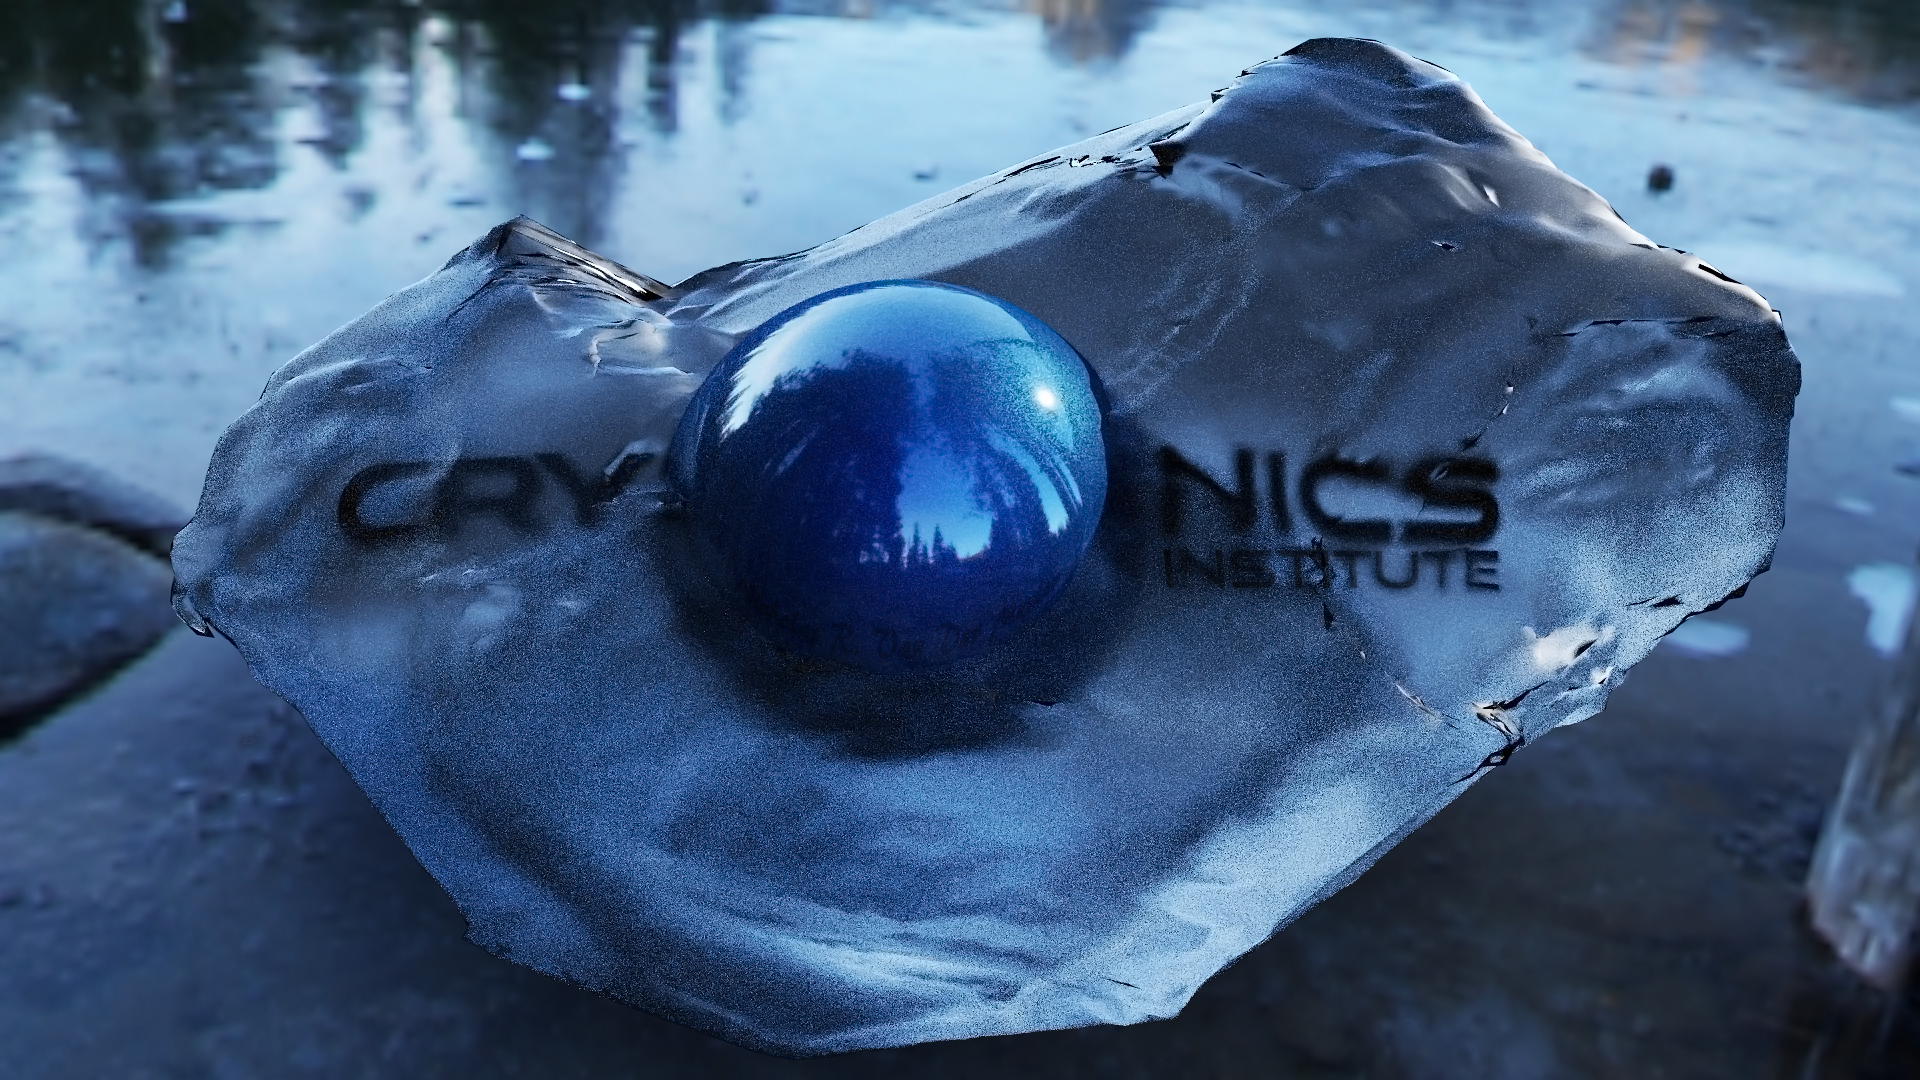 General 1920x1080 Cryonics Institute Cryonics ice ball